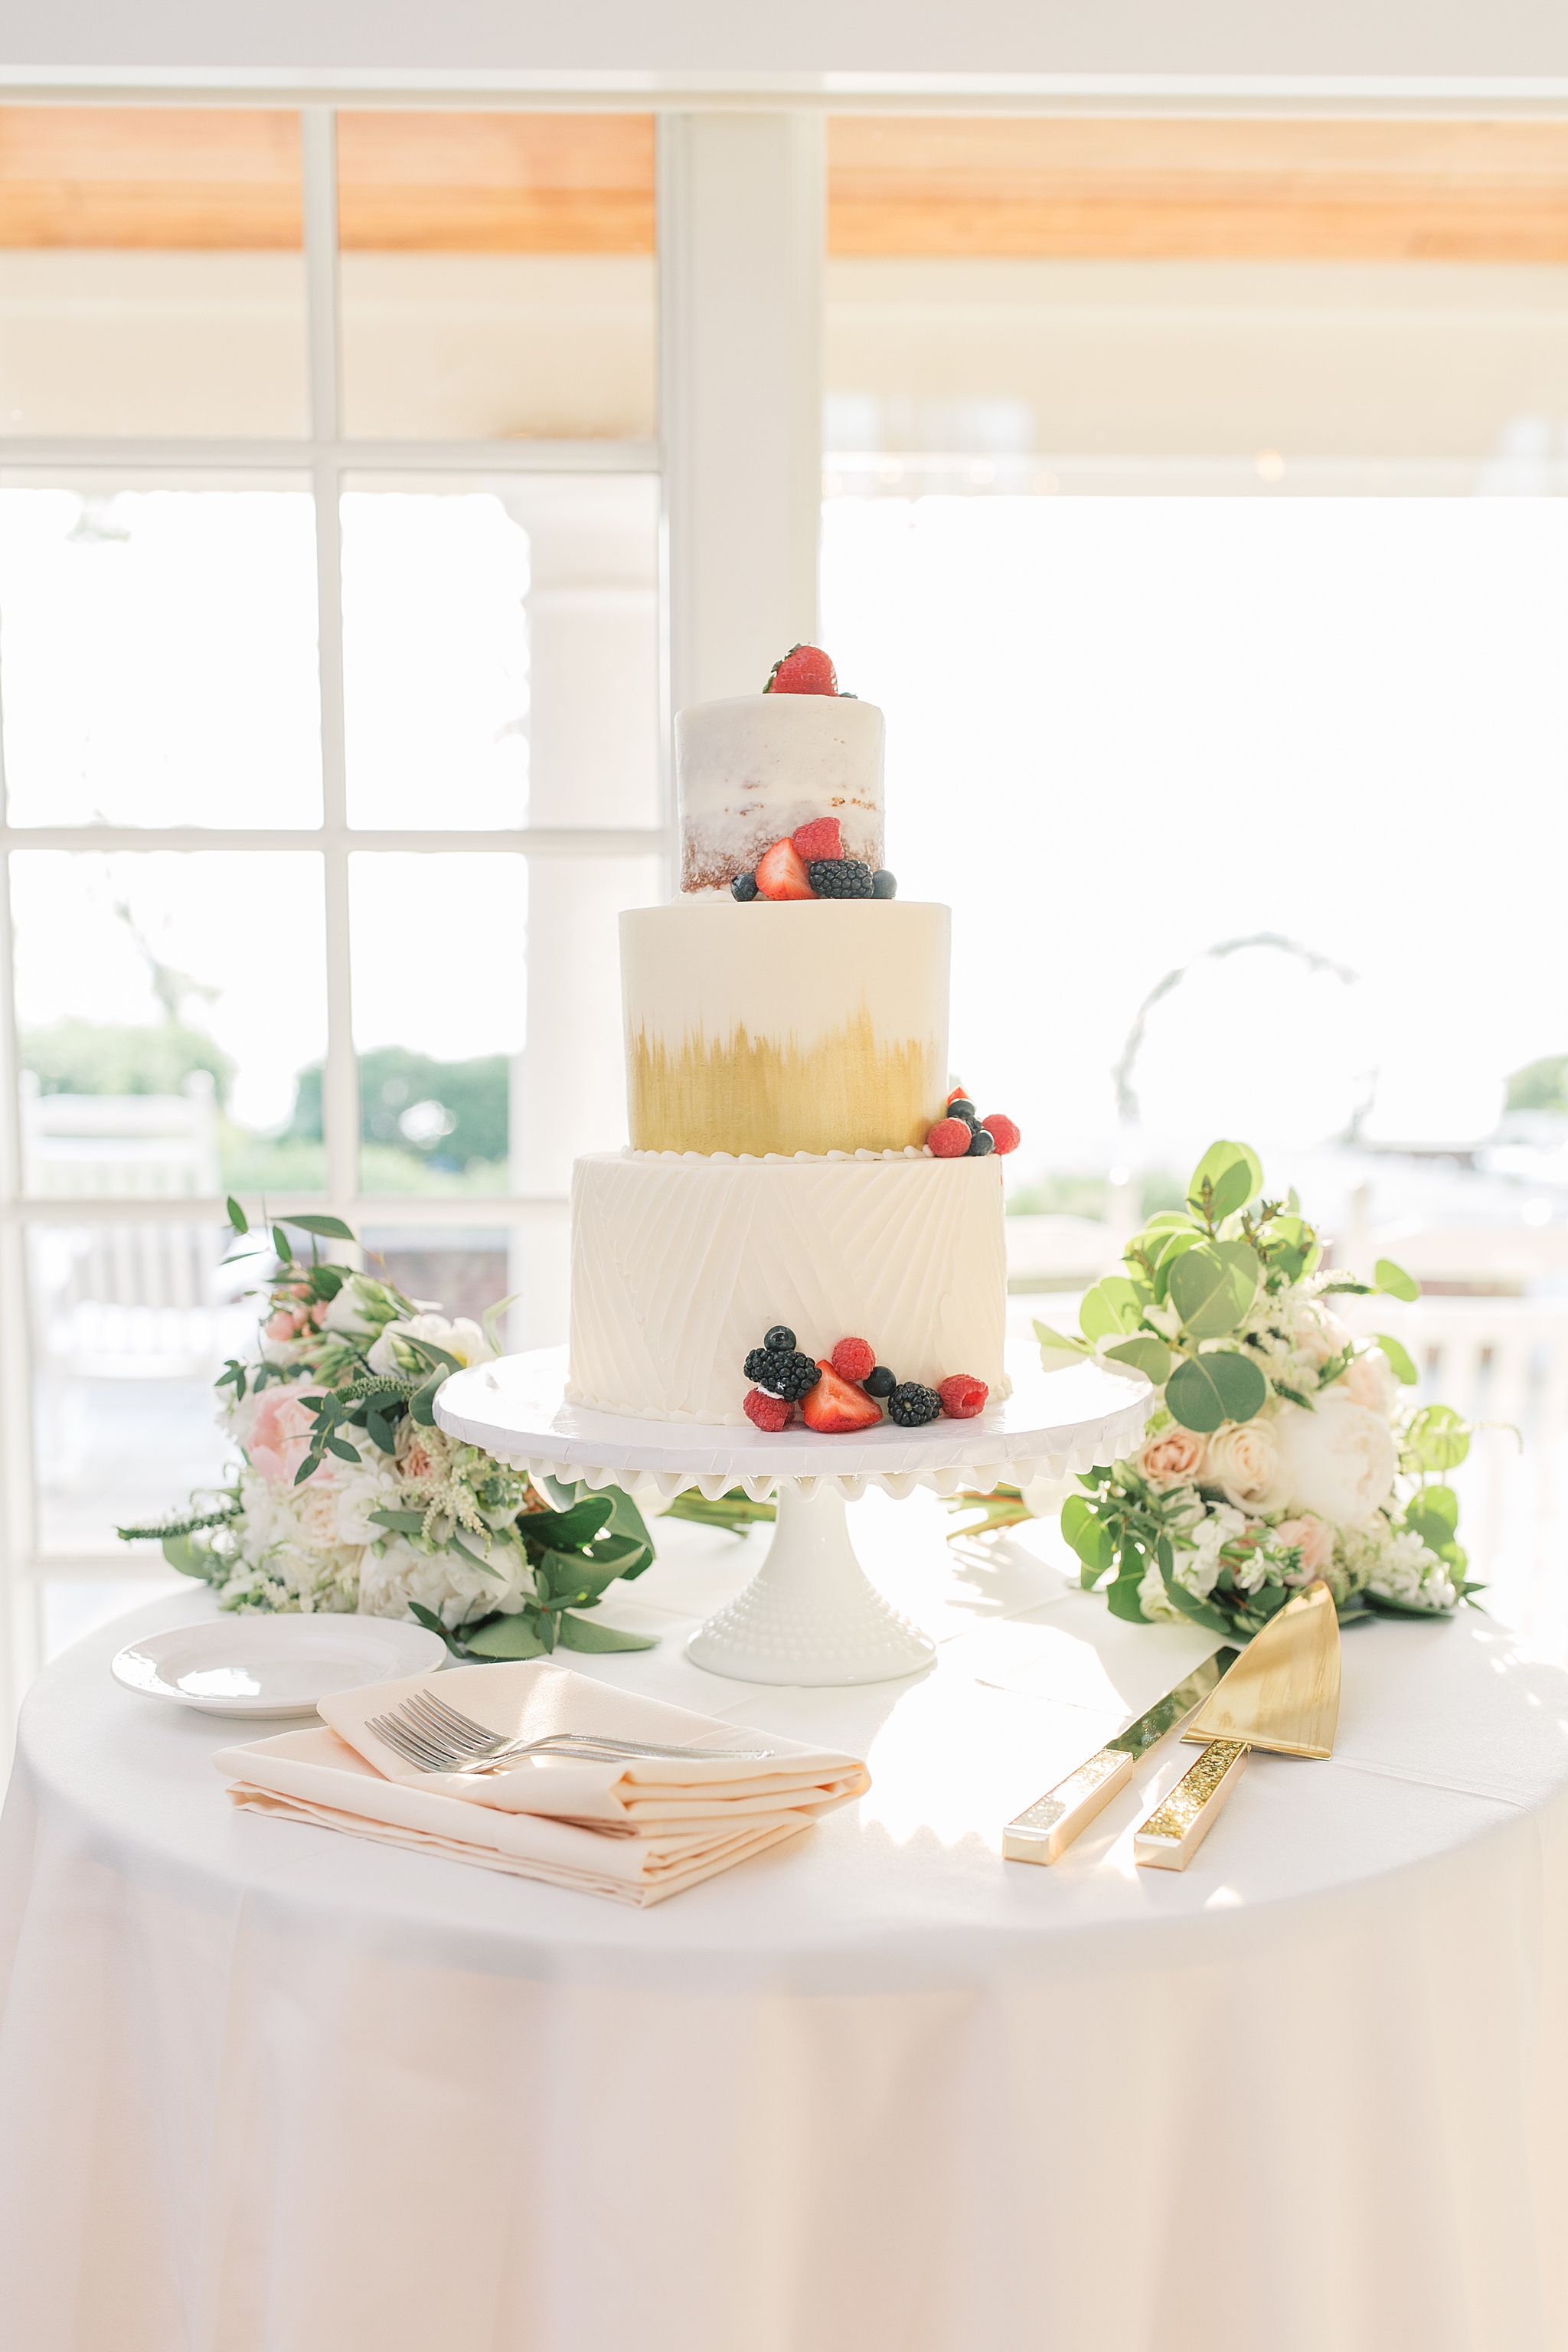 An elegant coastal wedding photographed by Alicia Lacey Photography at the Chesapeake Bay Beach Club in Stevensville, MD.